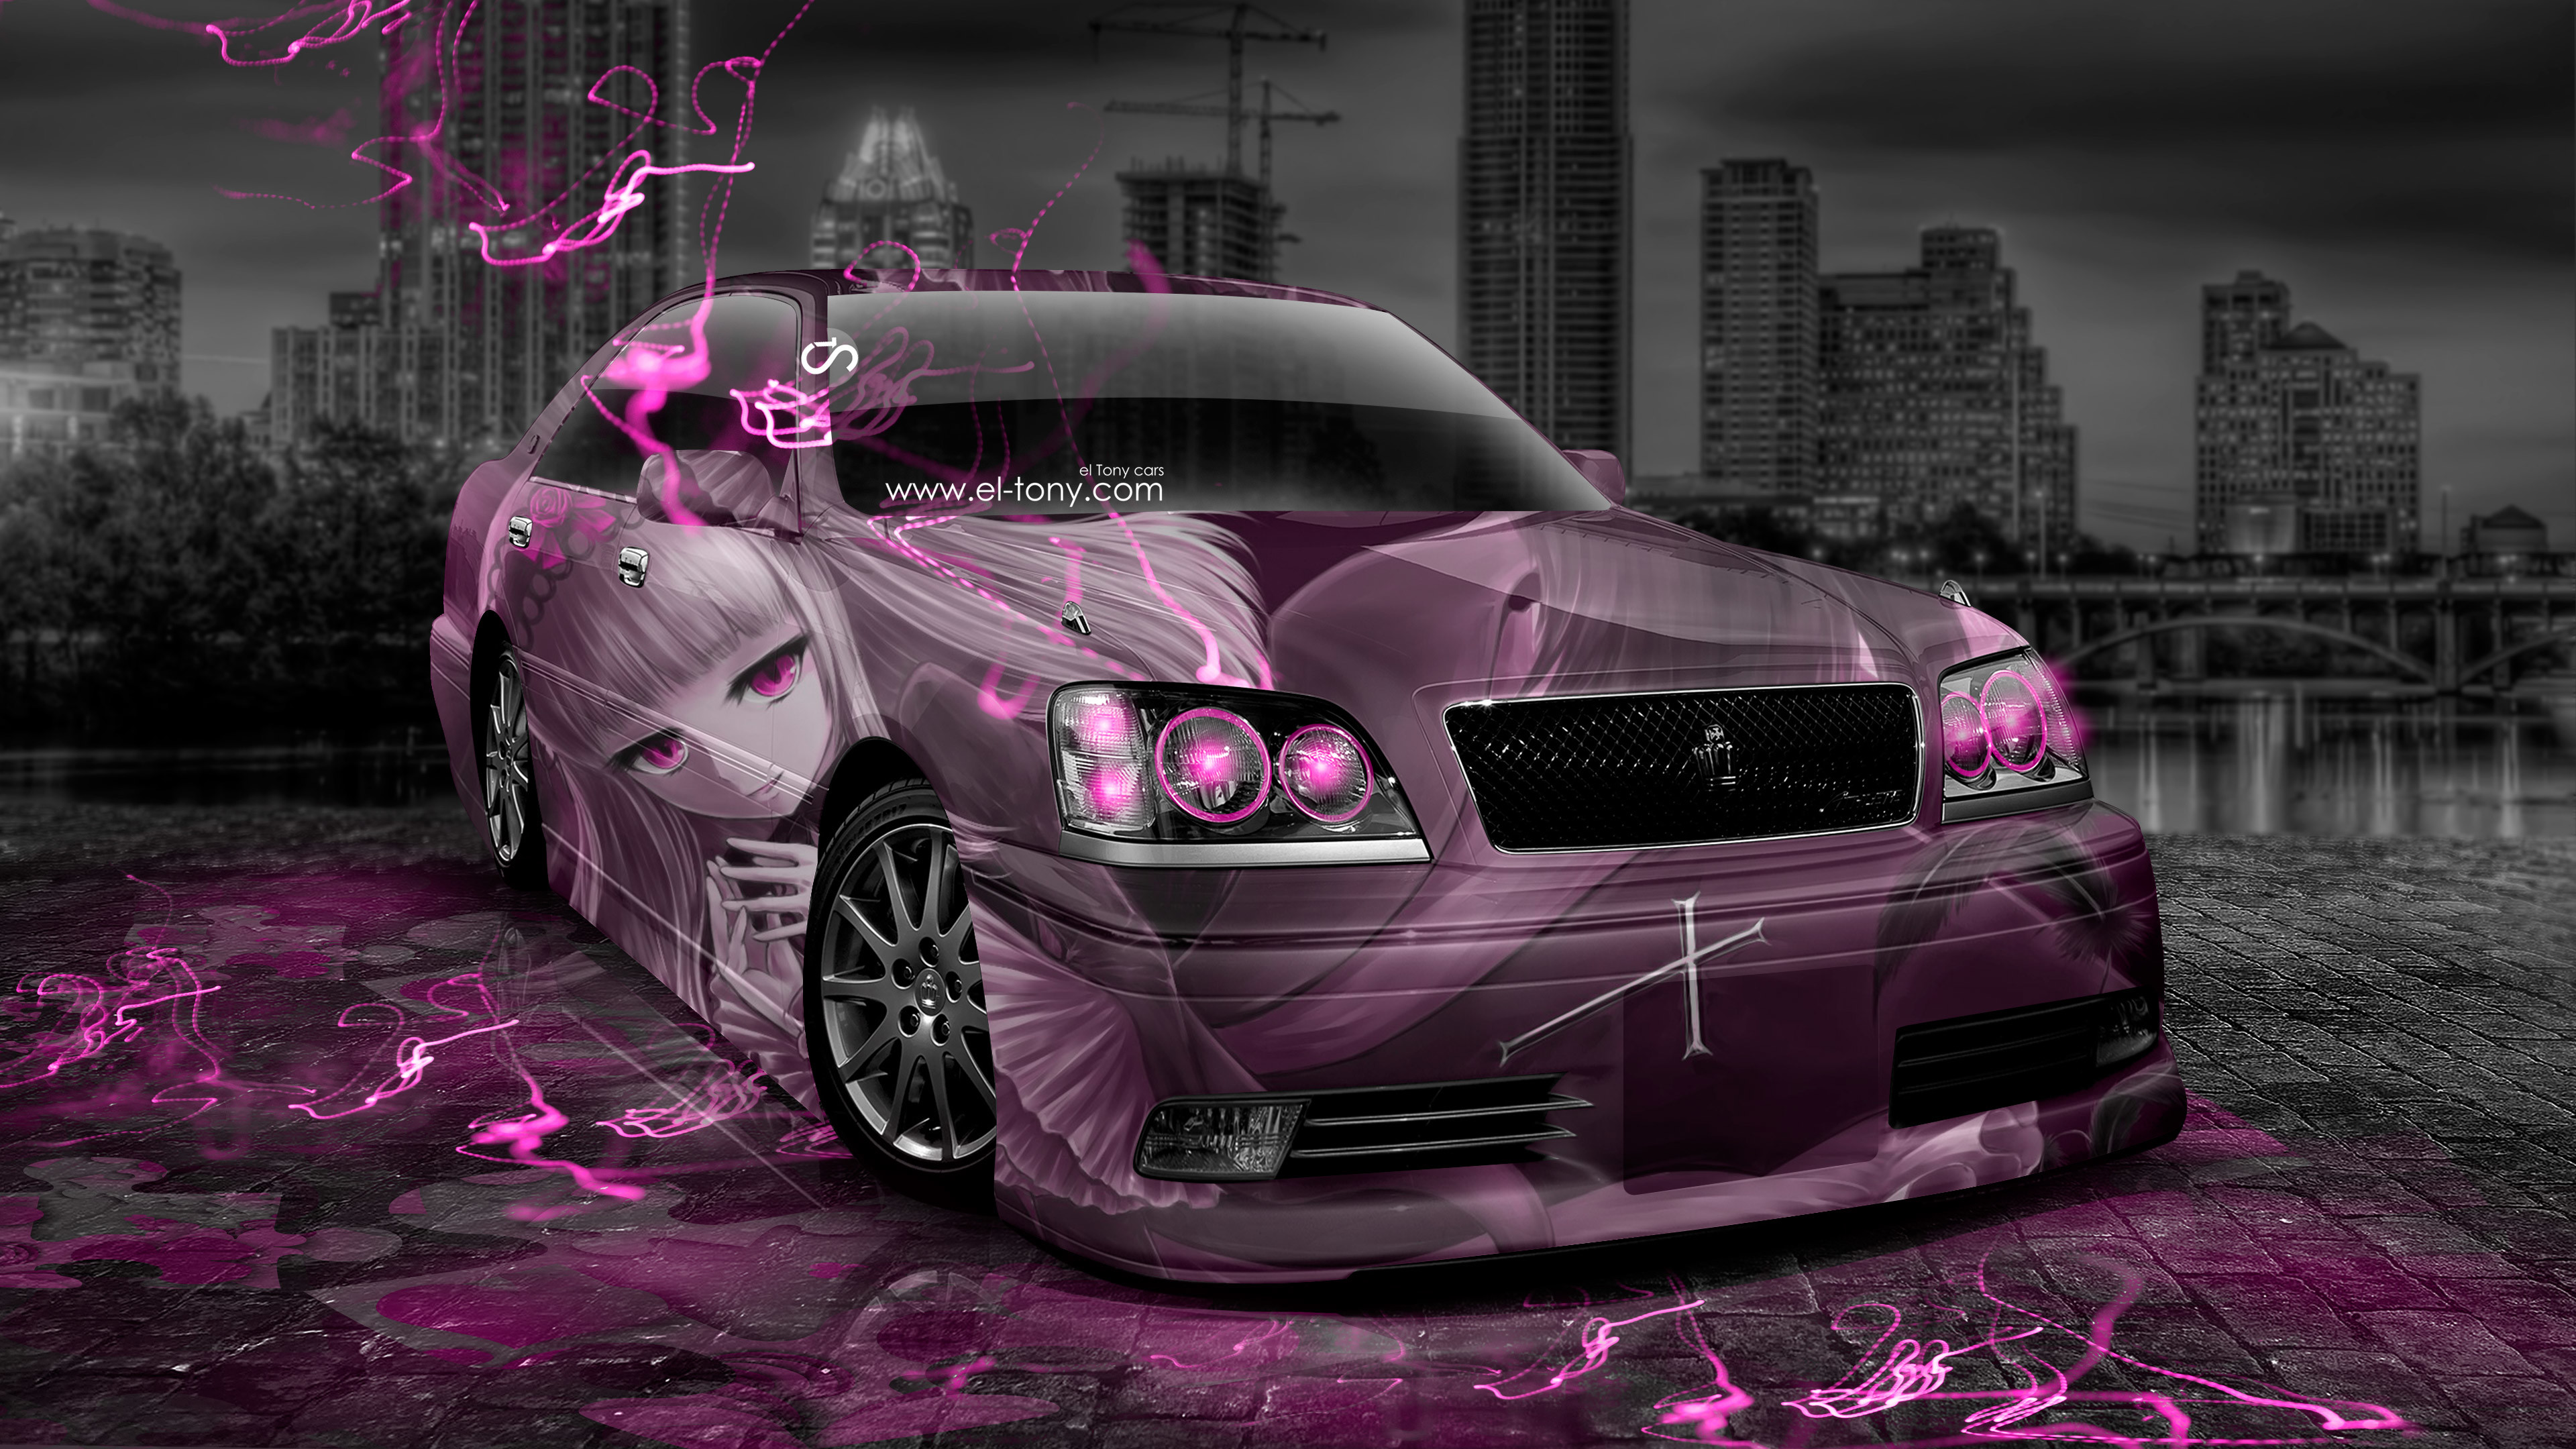 3840x2160 CATEGORY Cars, Wallpapers Â·  Toyota-Crown-Athlete-JDM-Anime-Girl-Aerography-City-